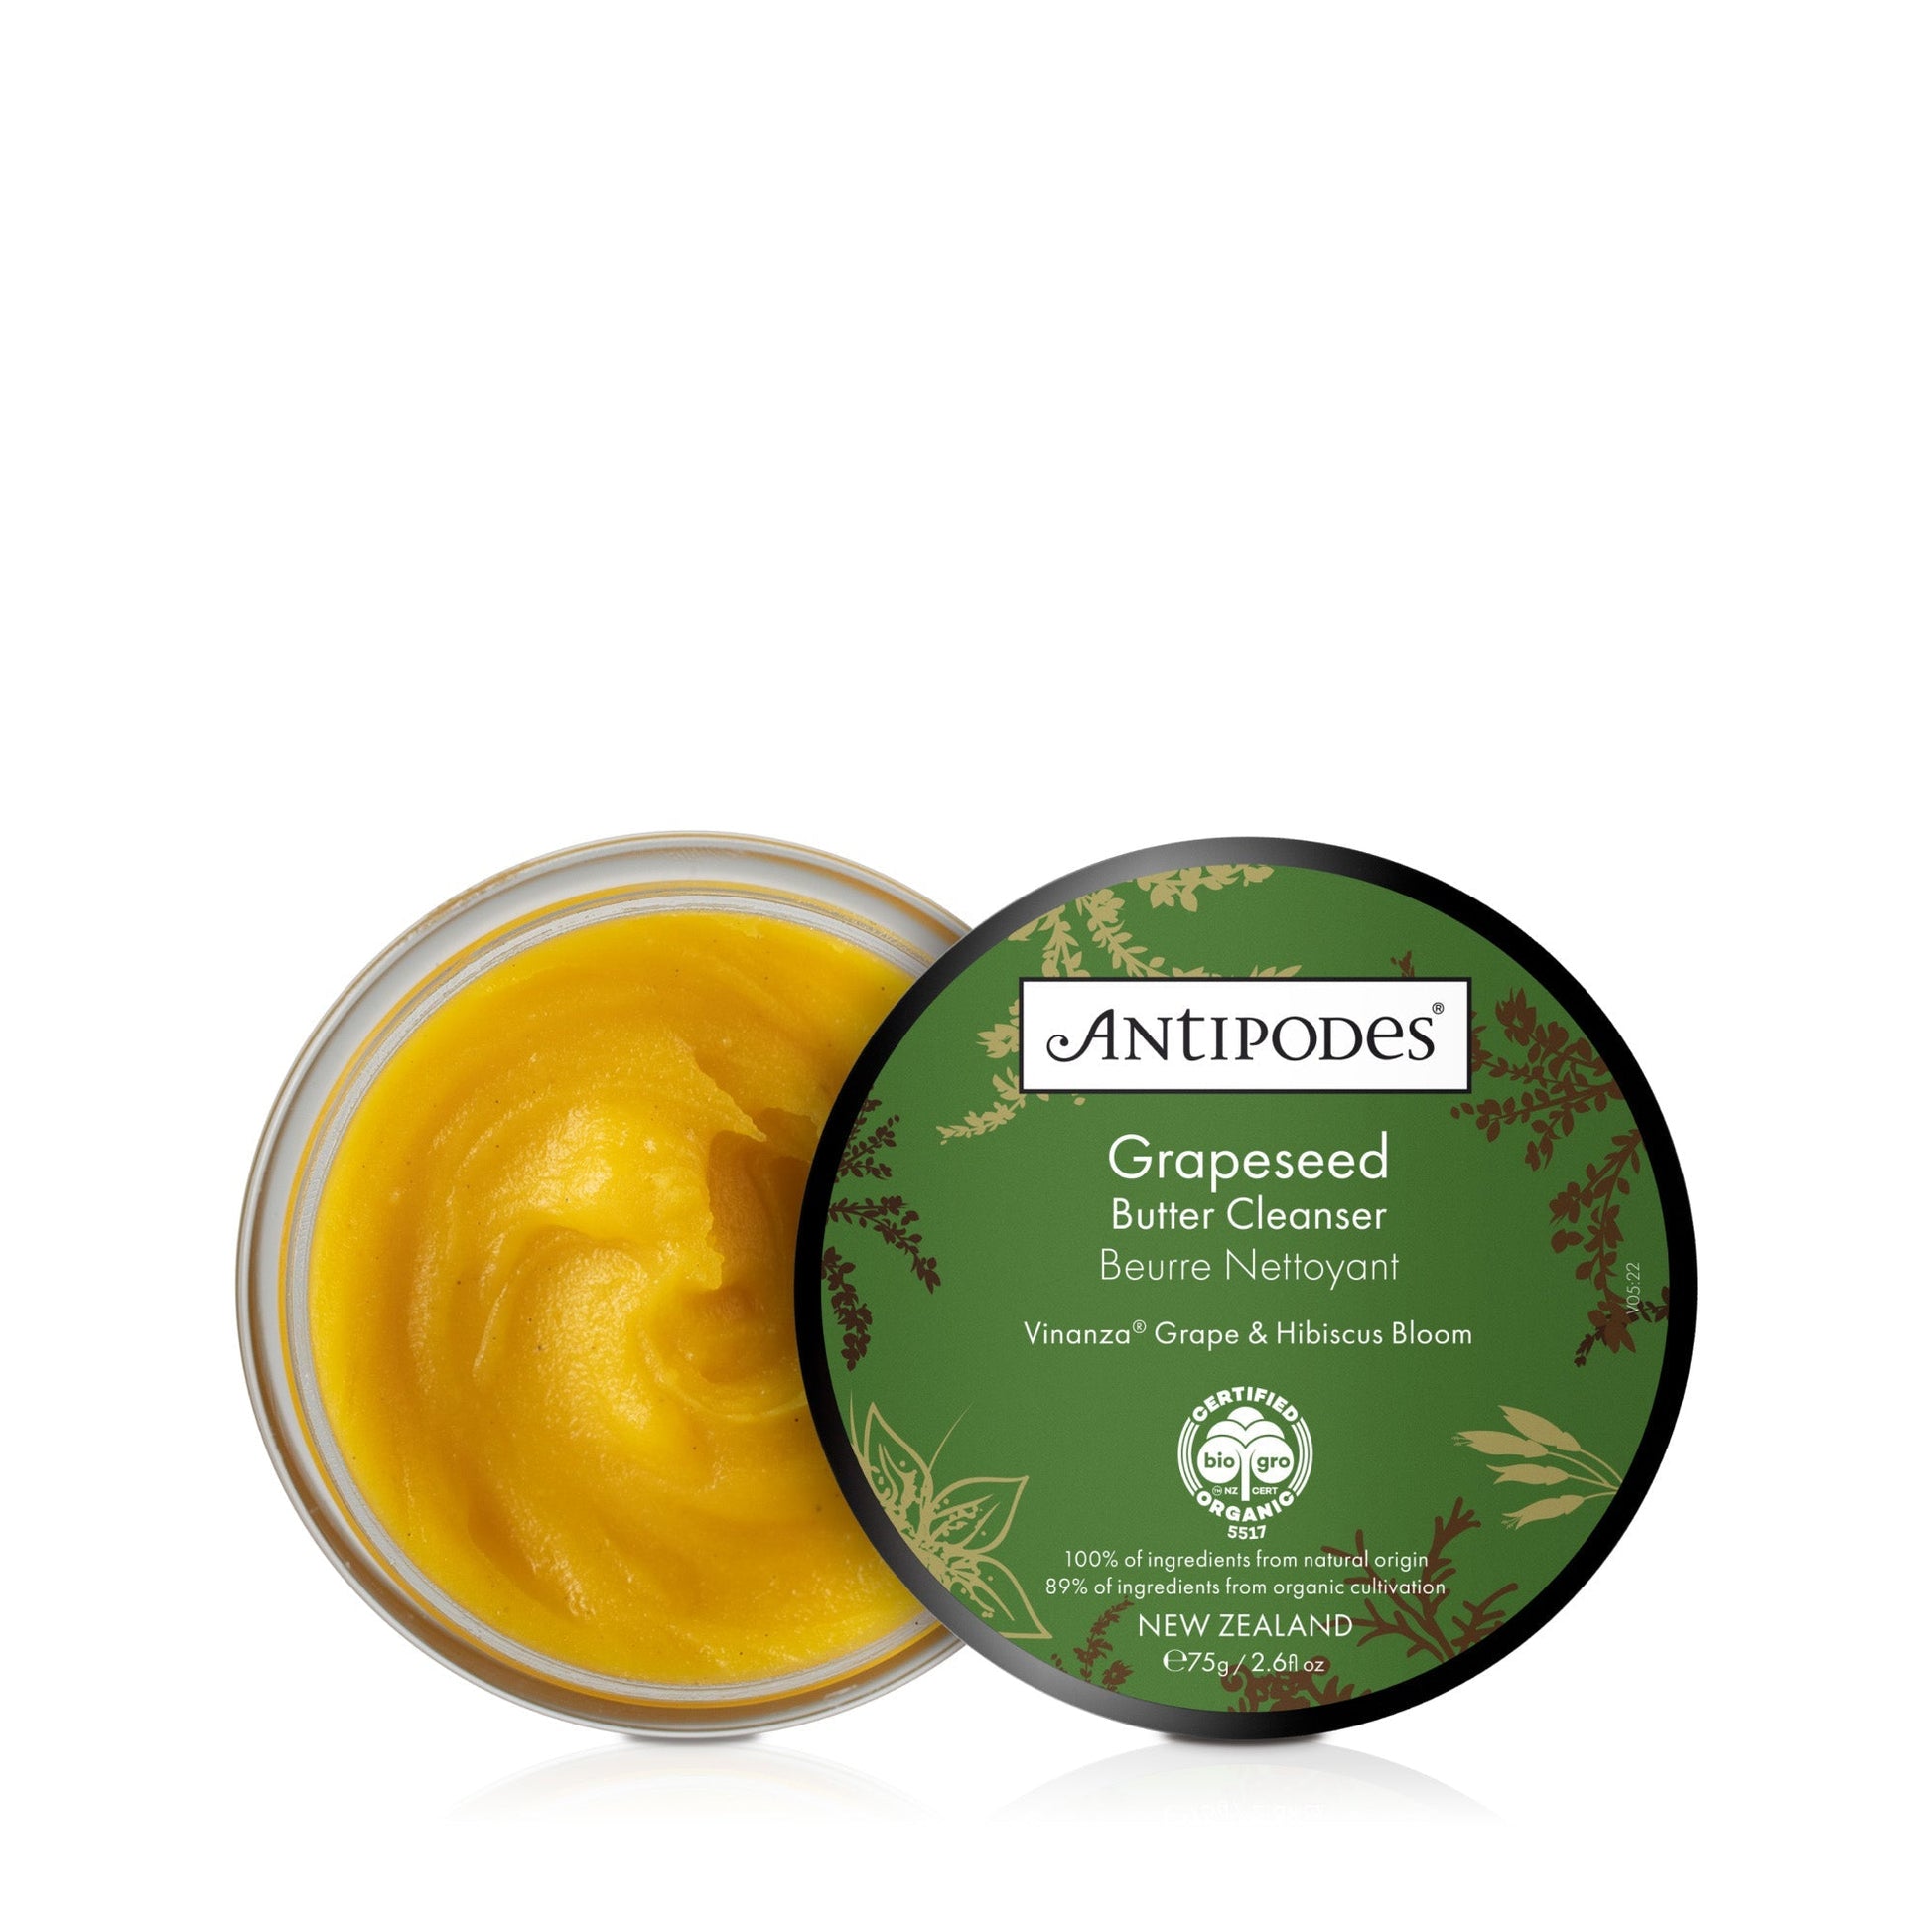 Grapeseed Butter Cleanser 75g - Antipodes Australia